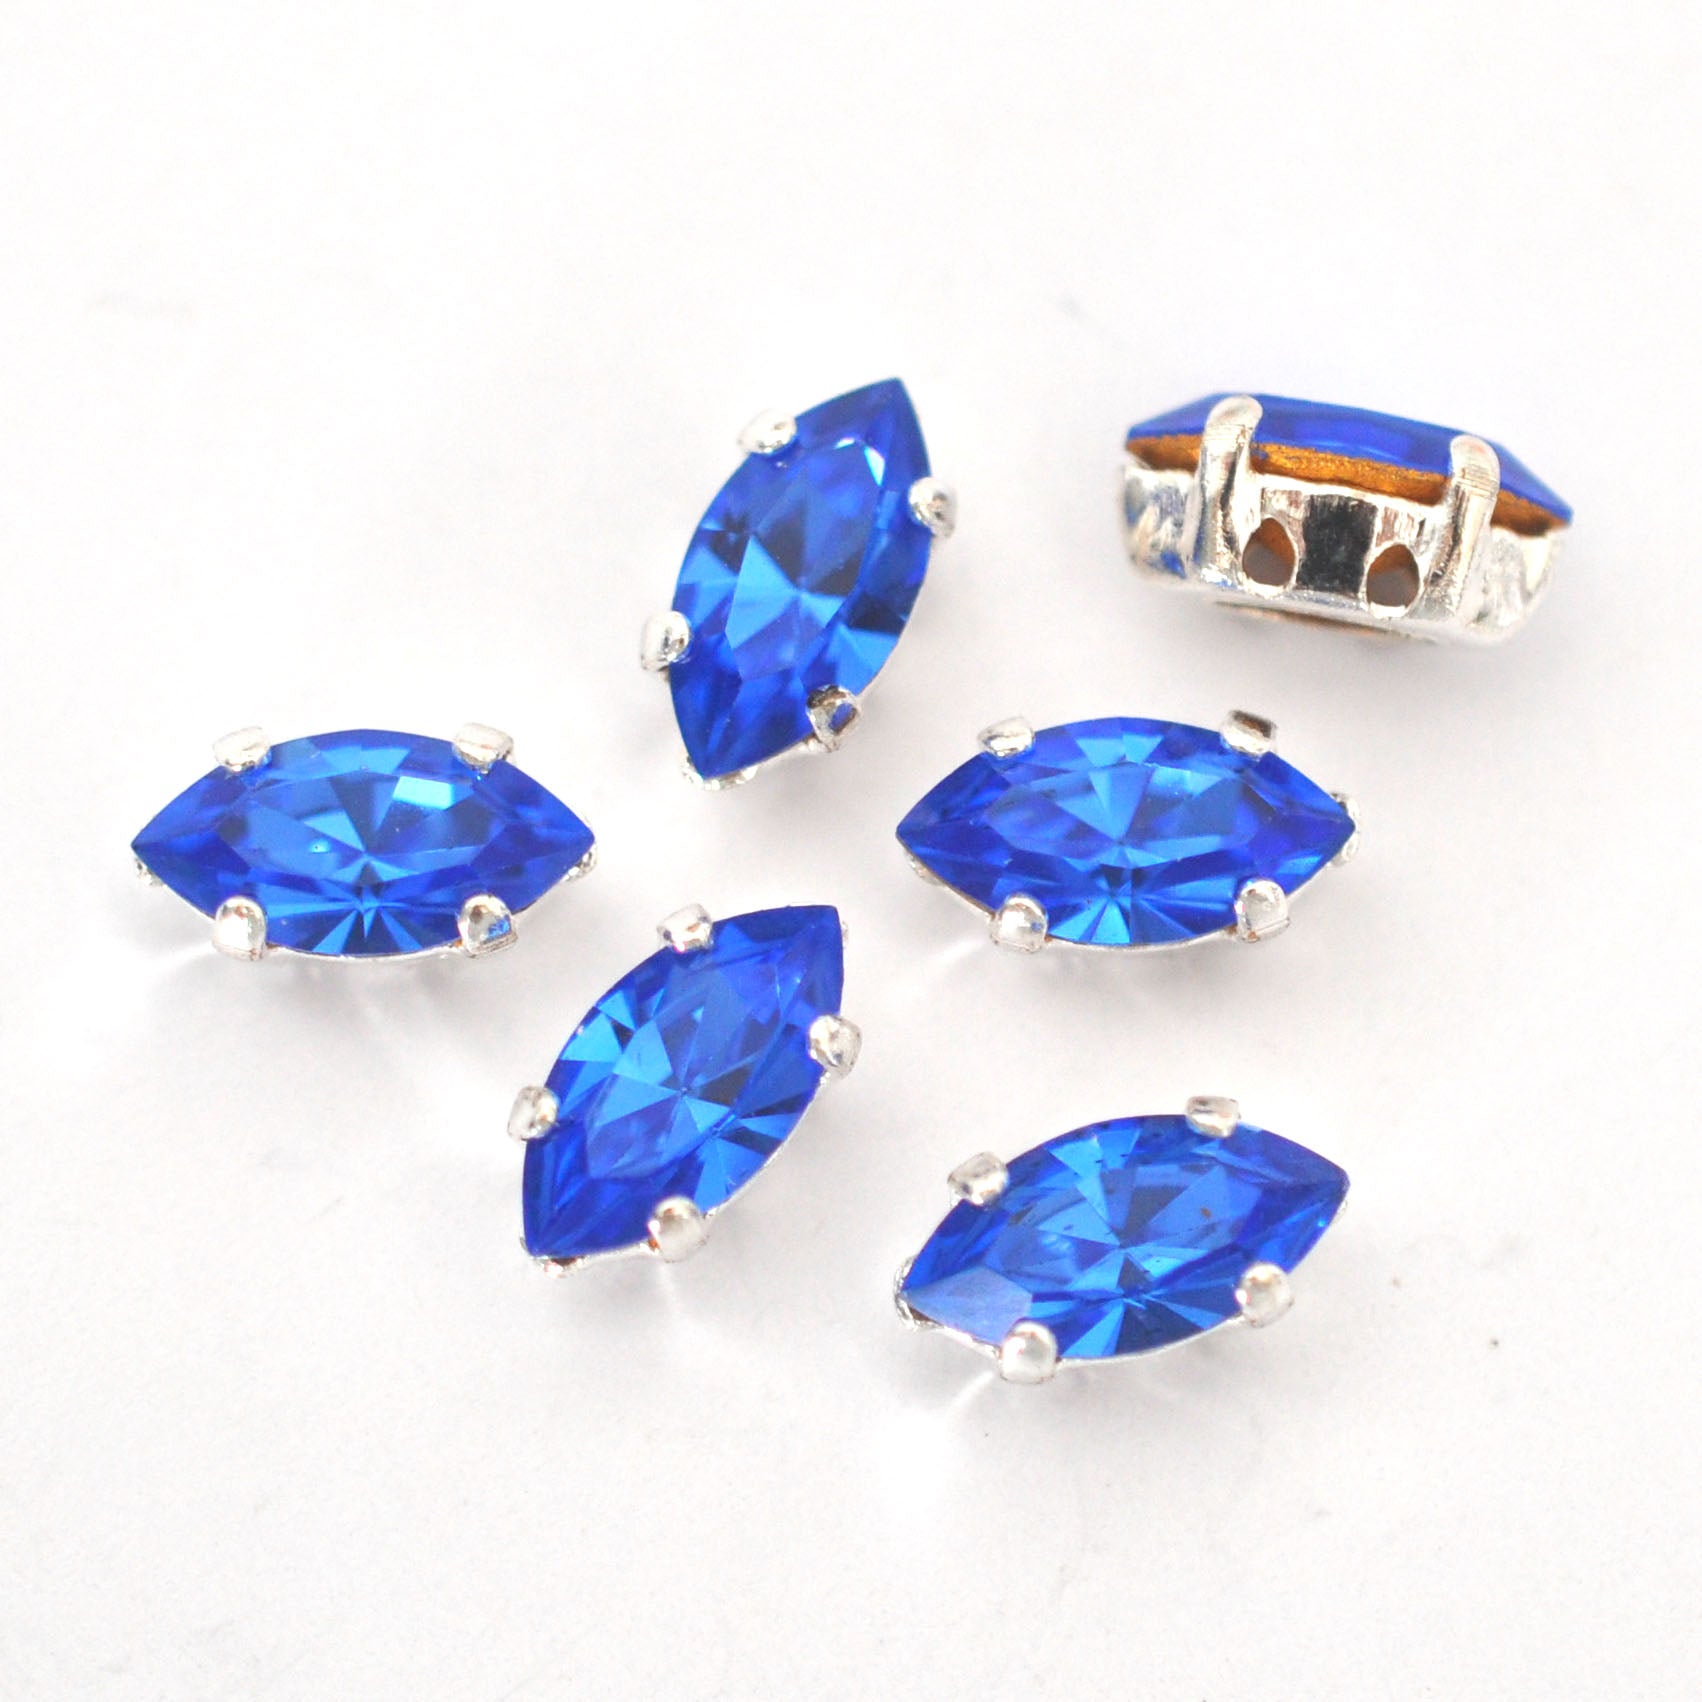 Sapphire 10x5mm Navette Sew On Crystals - 6 Pieces